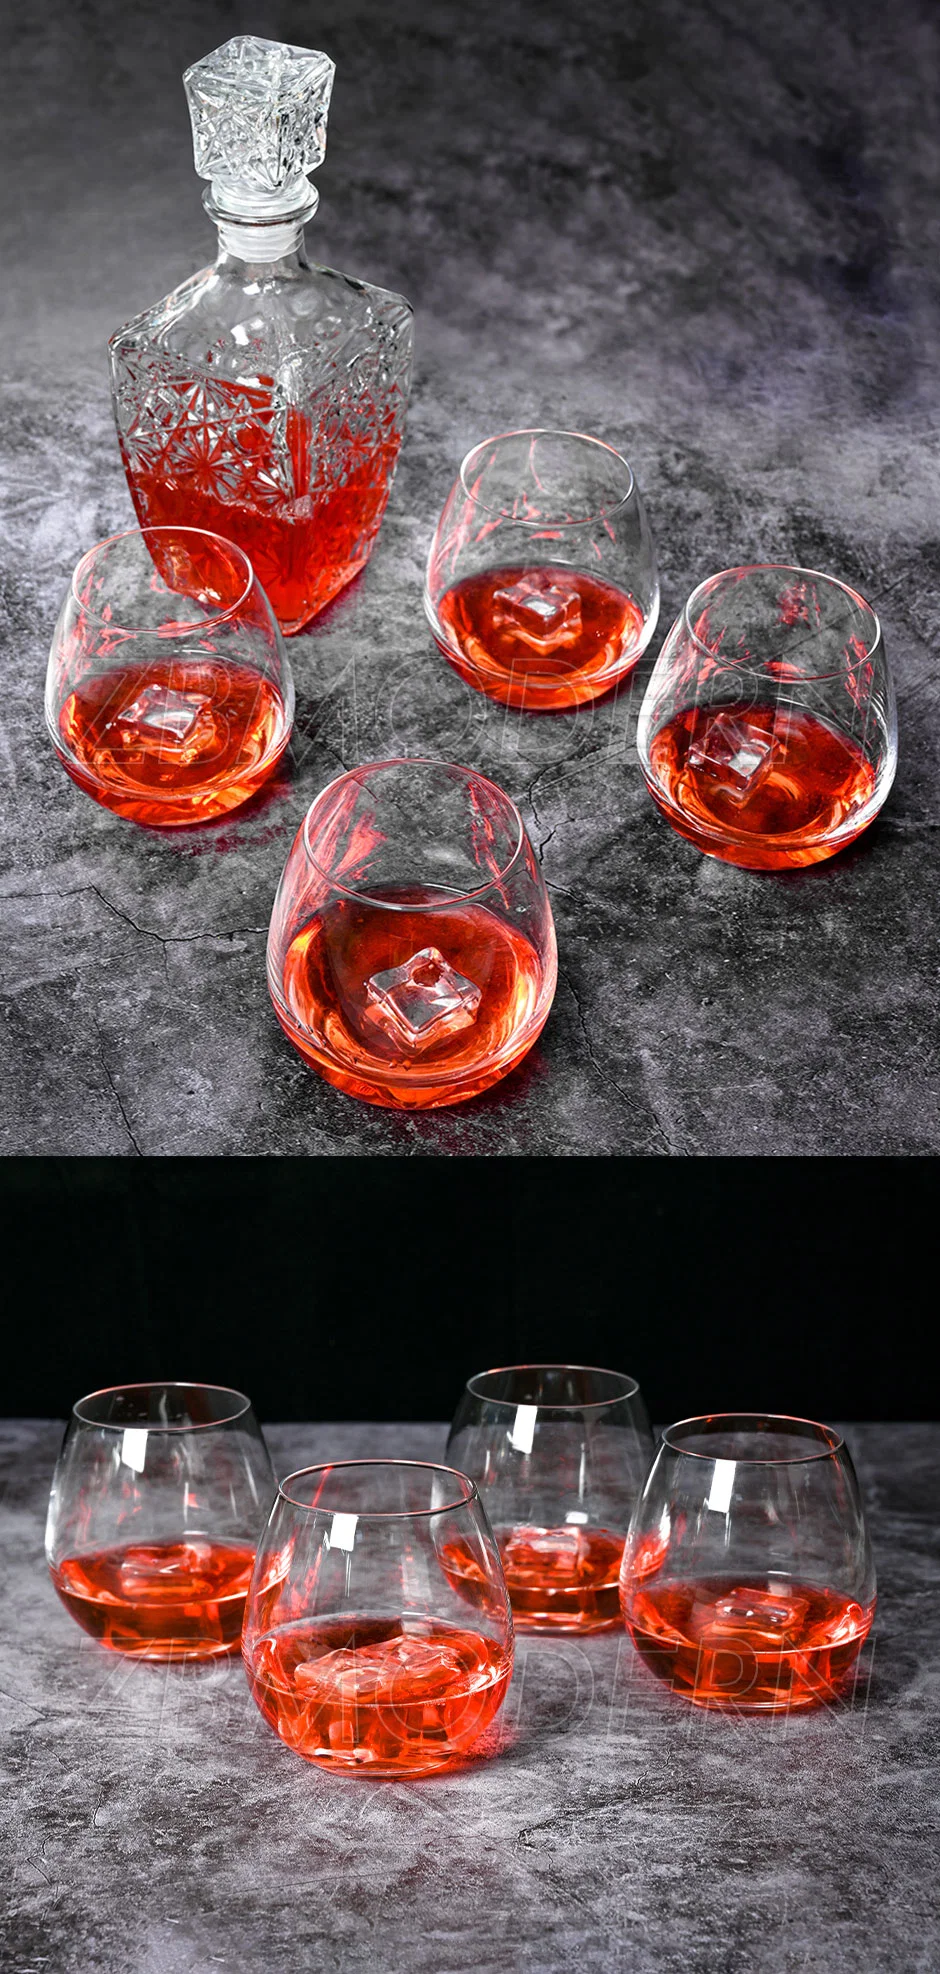 Premium Lead-Free Glass Cups Lead-Free Drinking Drinking Glasses for Water Beverages Stemless Wine Glasses Wholesale